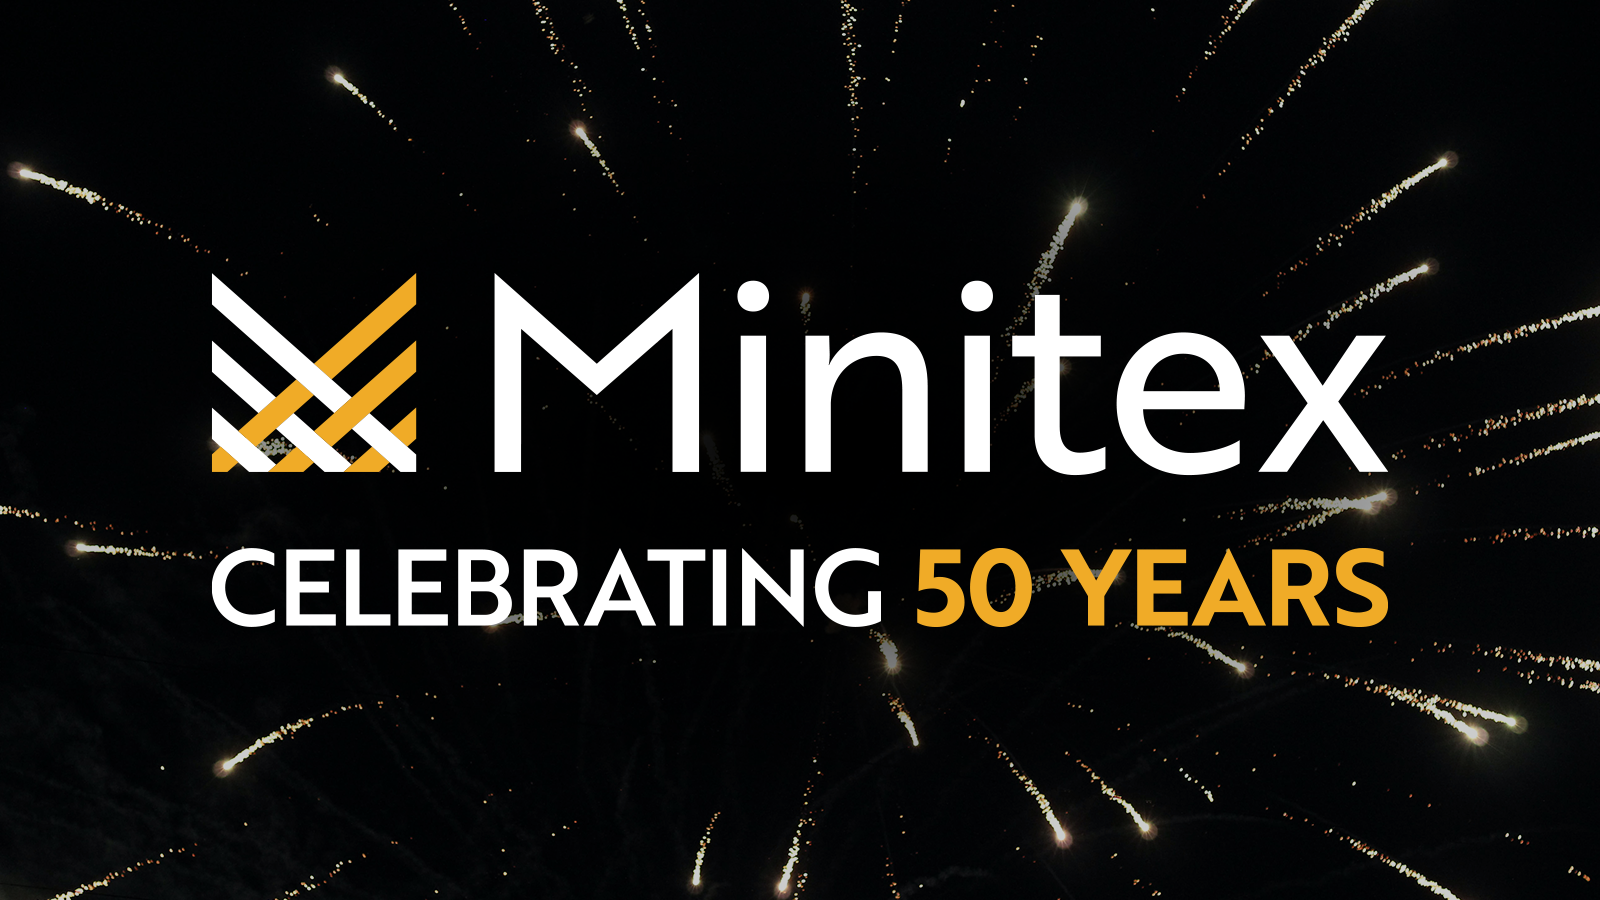 The Minitex 50th anniversary logo, "Minitex, Celebrating 50 Years," set in front of a fireworks in the night sky.